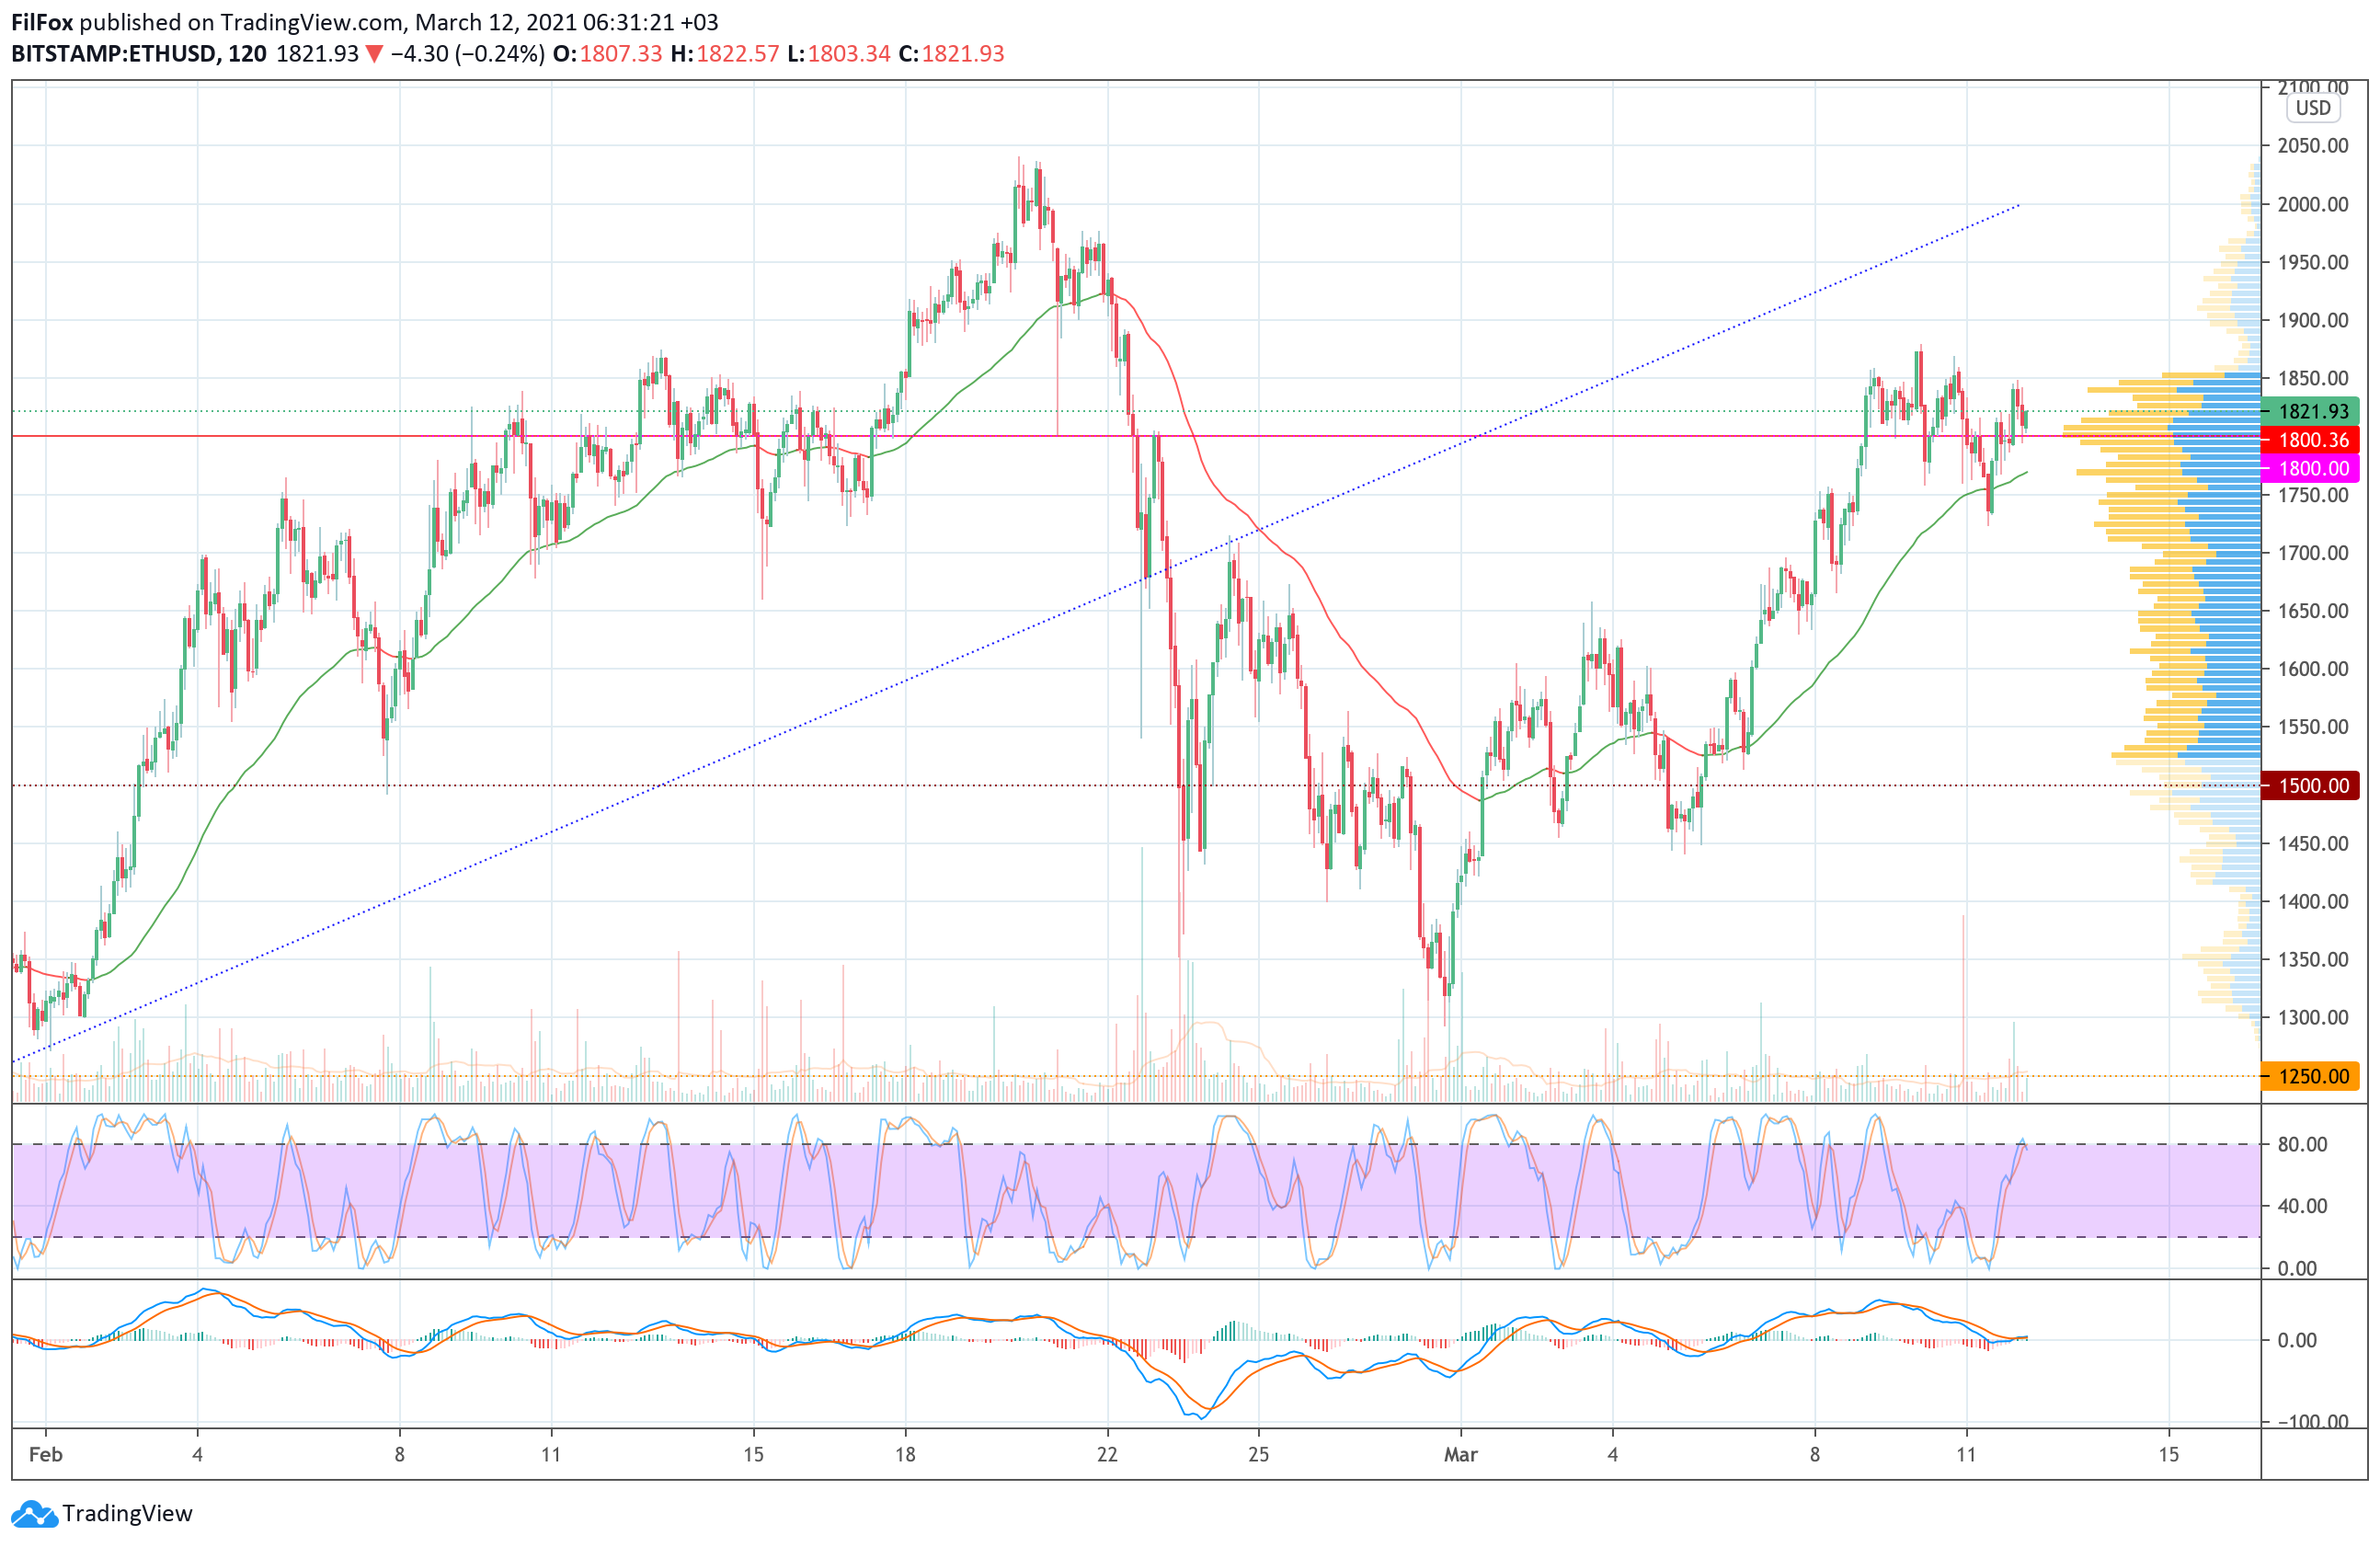 Analysis of the prices of Bitcoin, Ethereum, XRP for 03/12/2021